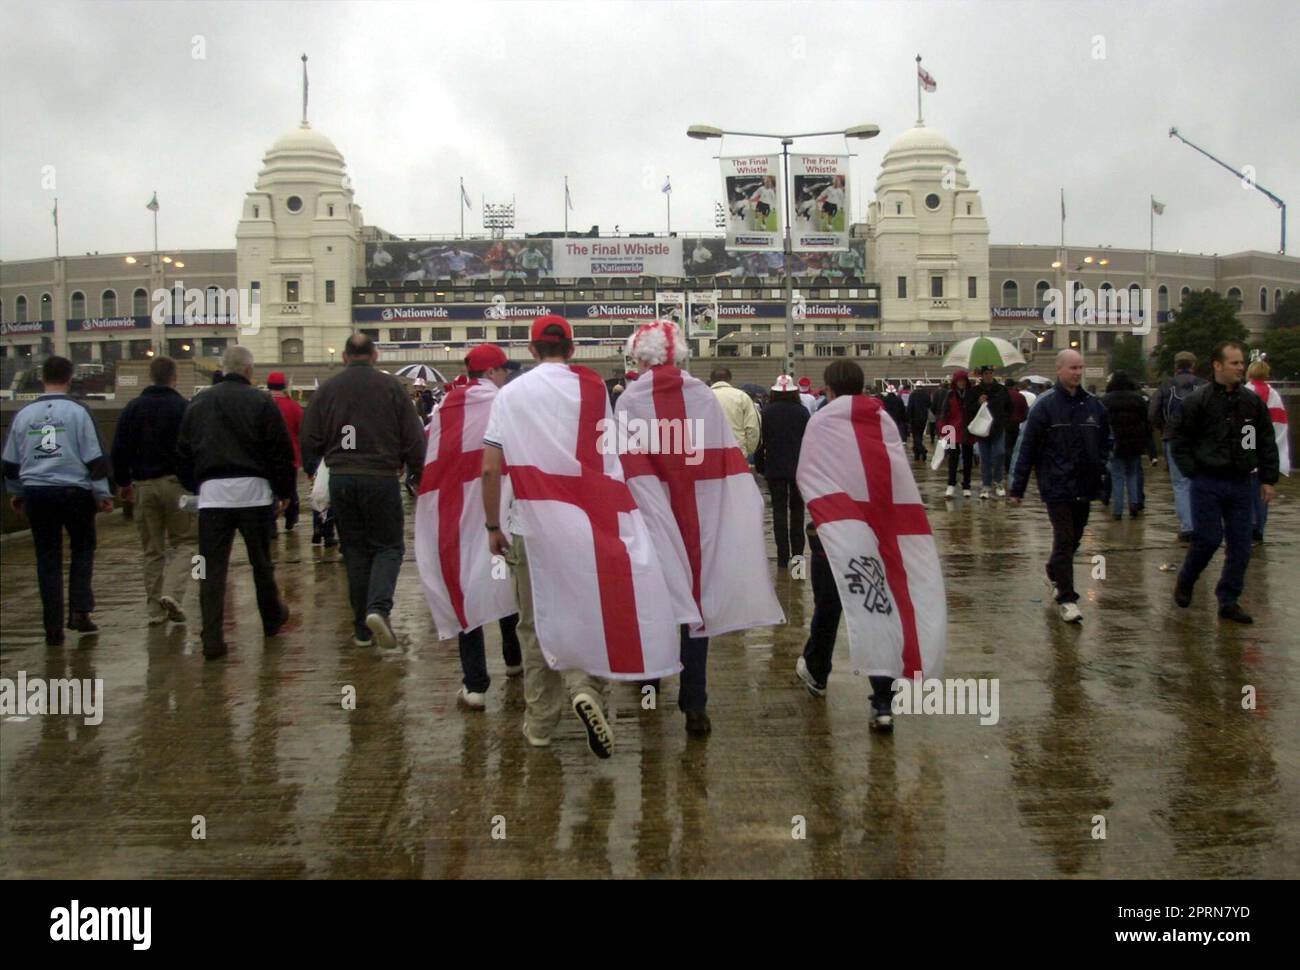 File photo dated 07-10-2000 of England supporters walking down a rain-soaked Wembley Way to Wembley Stadium, London, where England play Germany, 2000, in a World Cup Qualifying match, the last football match before the stadium is rebuilt. England fans headed into the old Wembley for its final match, a 1-0 defeat to Germany in a qualifier for the 2002 World Cup on October 7, 2000. Issue date: Thursday April 27, 2023. Stock Photo